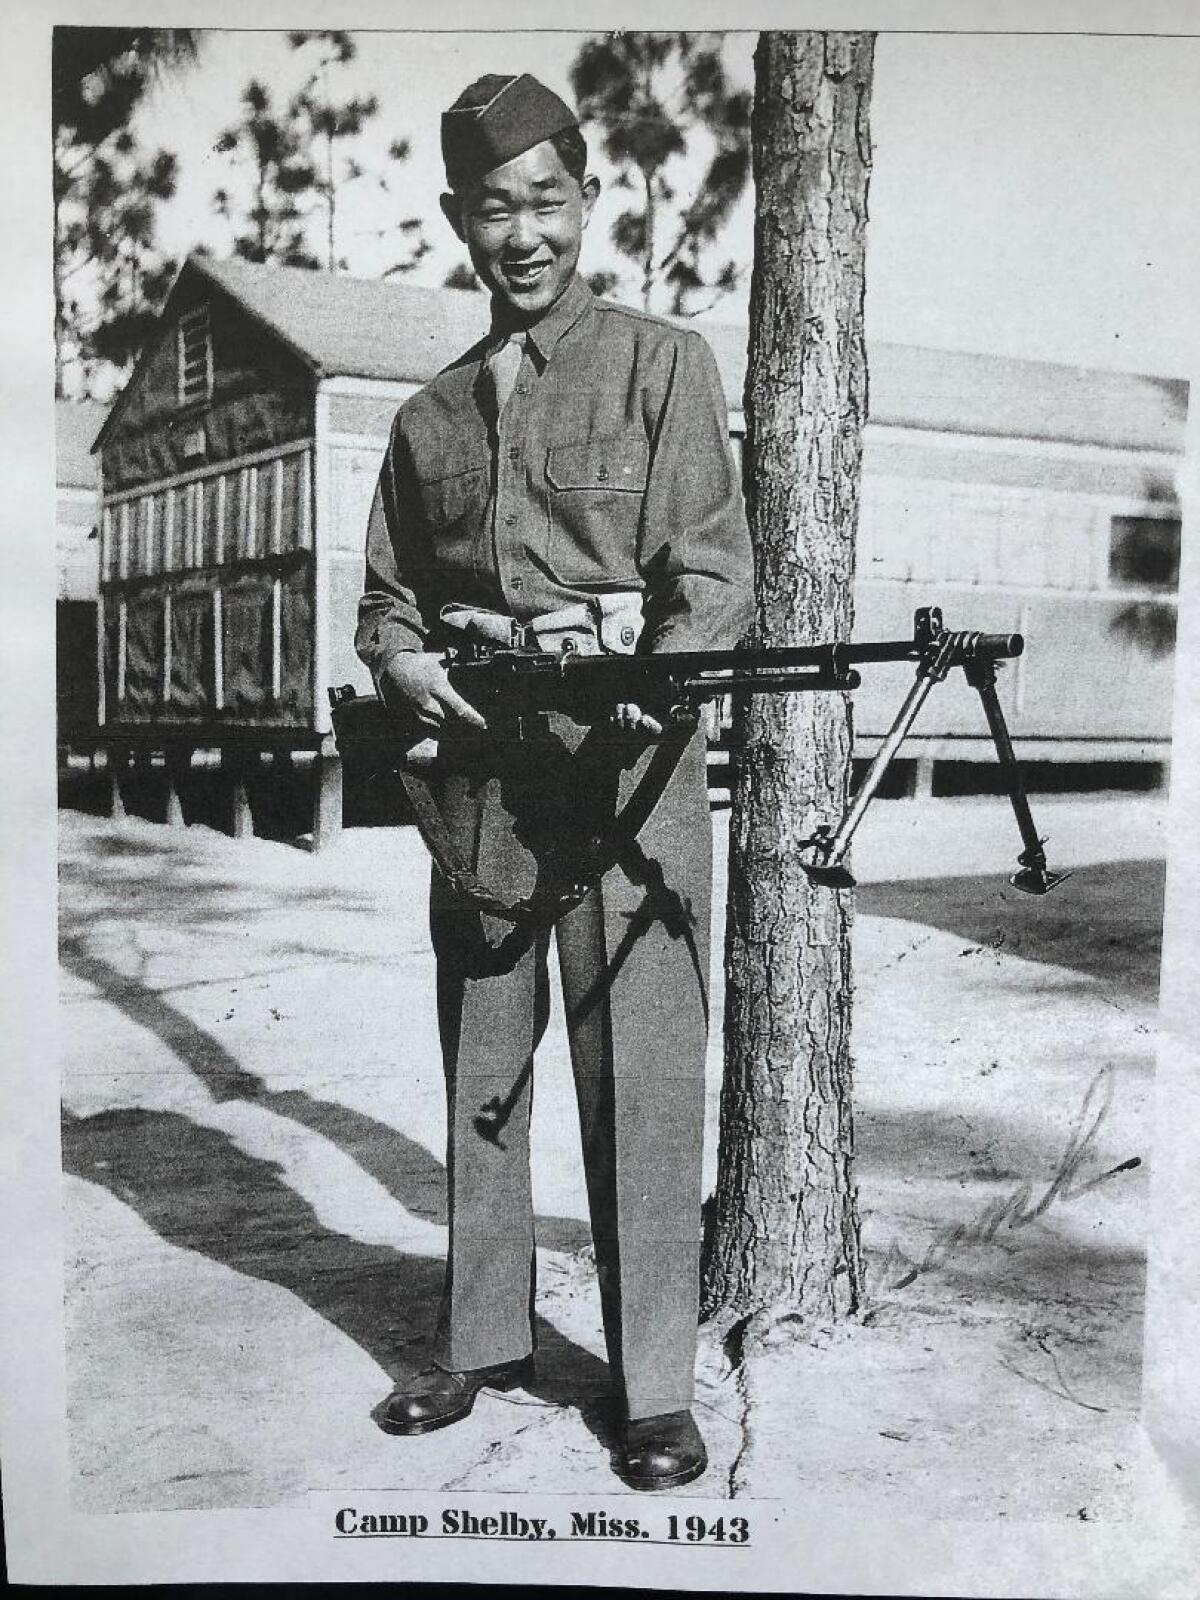 Young Frank Wada stands outside a barracks, holding a gun.